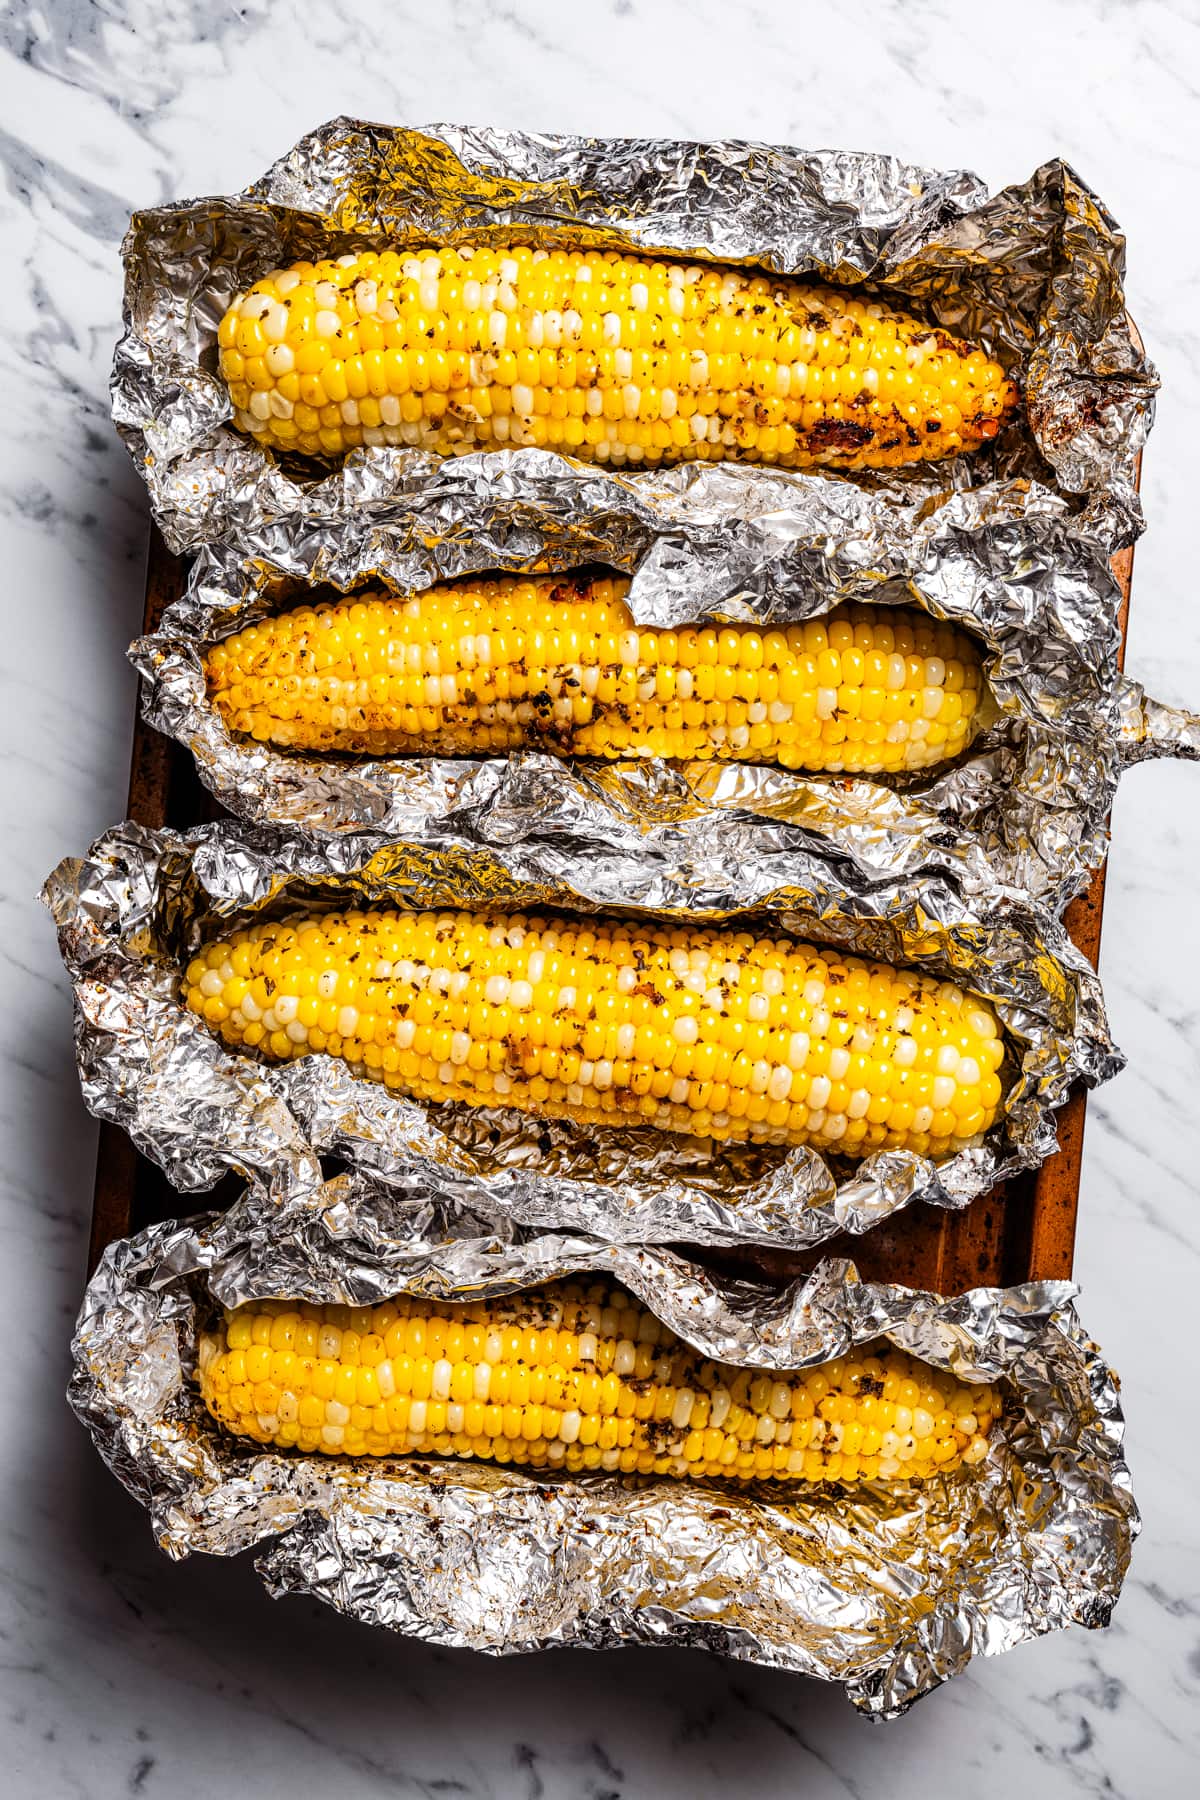 Four ears of corn partially unwrapped in foil on a baking sheet.